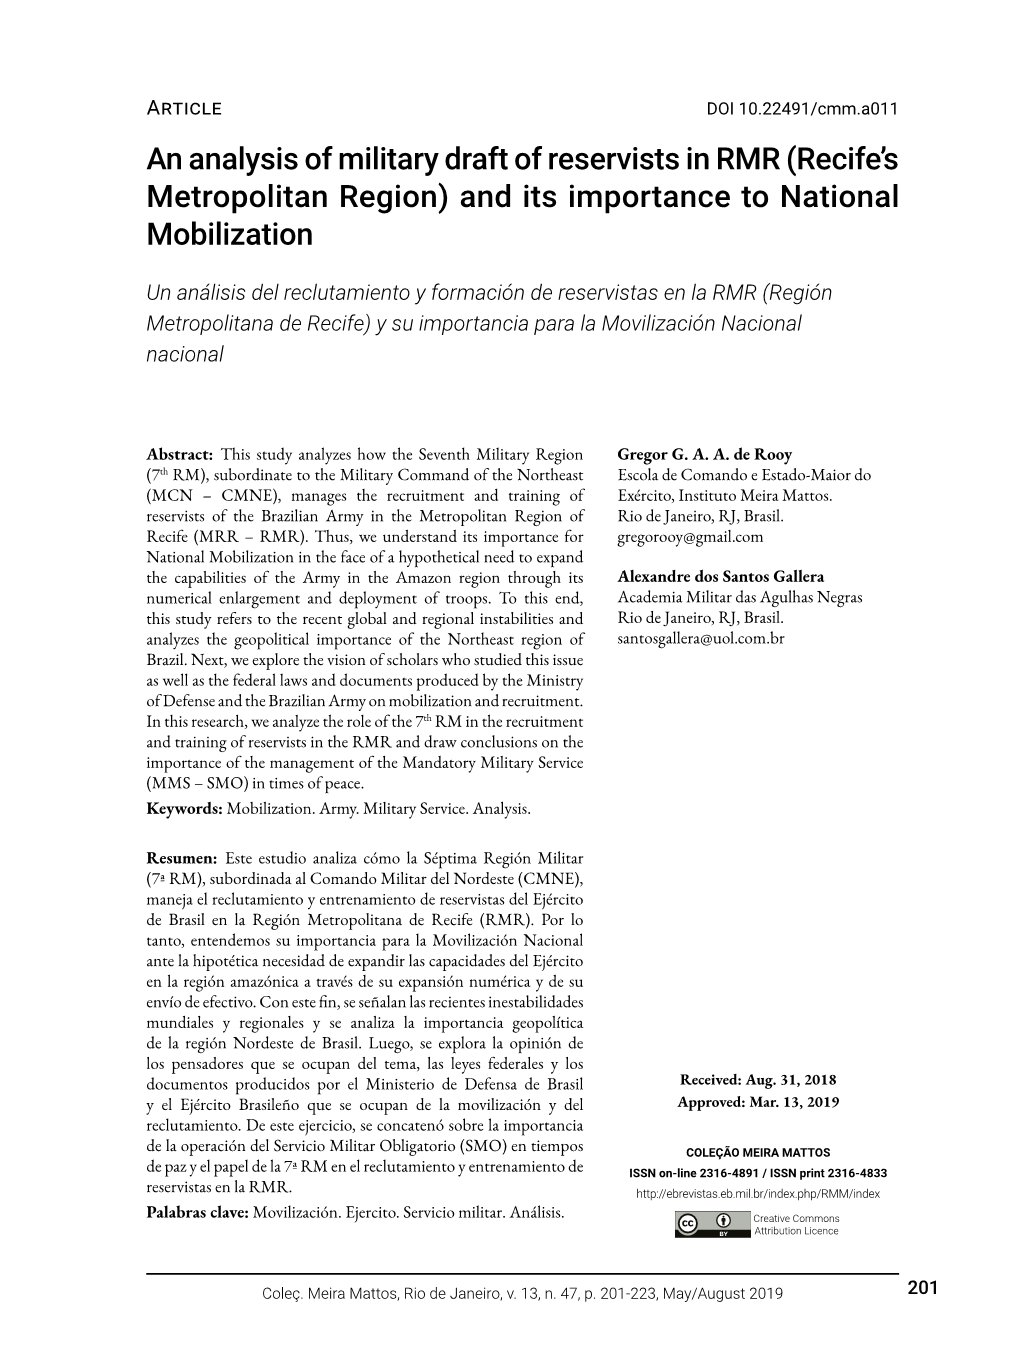 An Analysis of Military Draft of Reservists in RMR (Recife’S Metropolitan Region) and Its Importance to National Mobilization